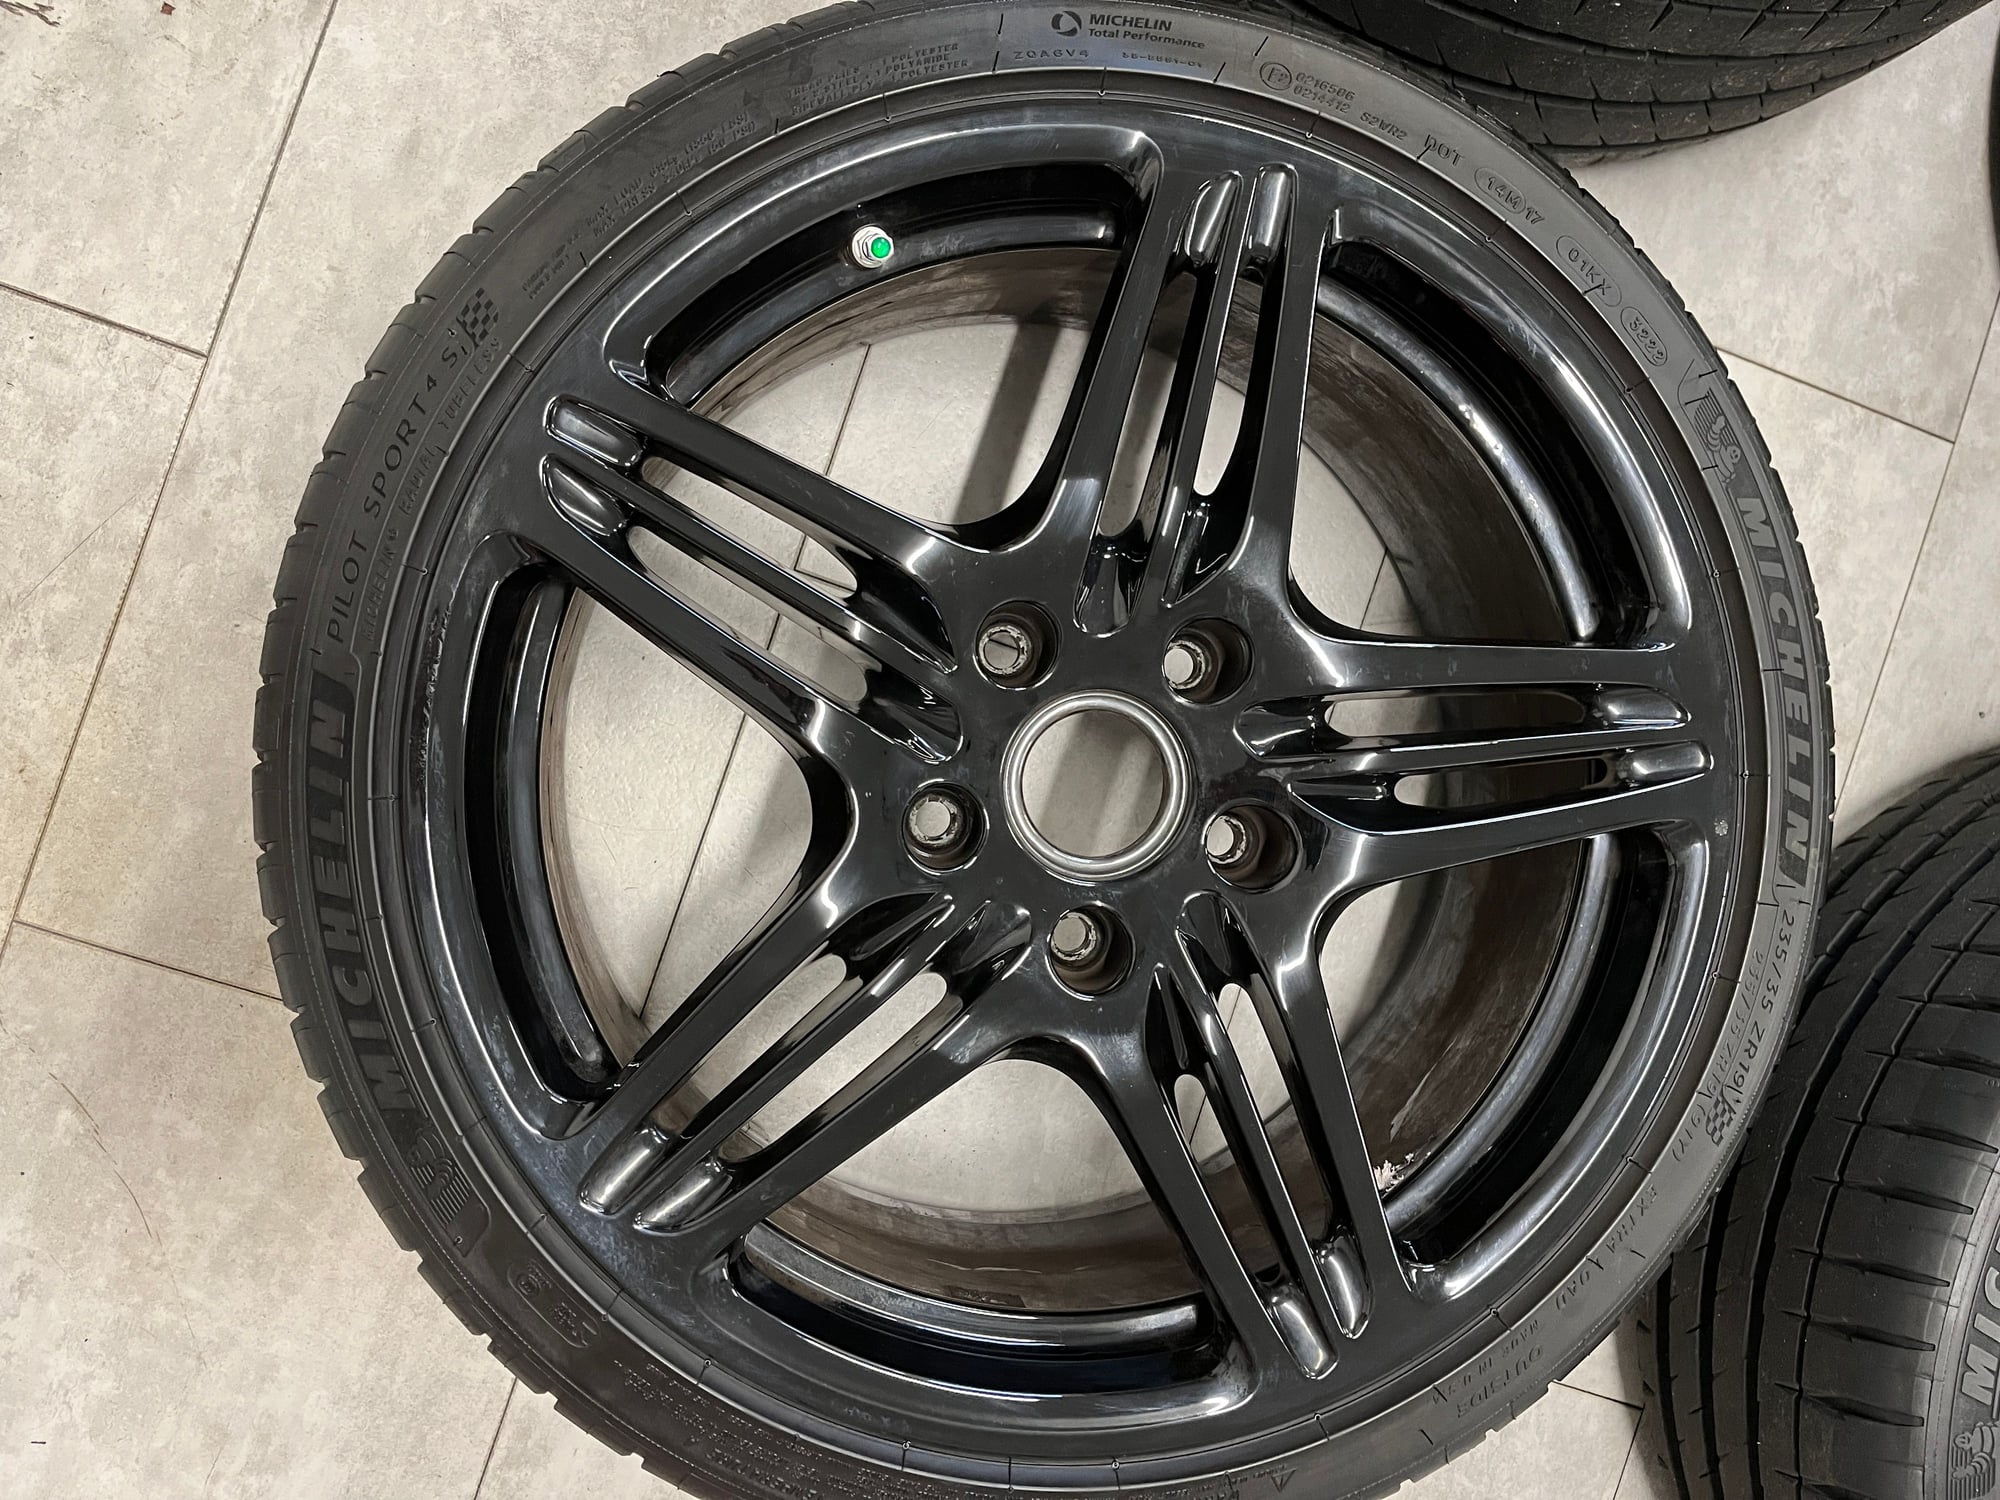 Wheels and Tires/Axles - Black 997.1 Turbo Wheels + New PS4S Tires + New TPMS - Used - 2007 to 2009 Porsche 911 - Fairfax, VA 22031, United States